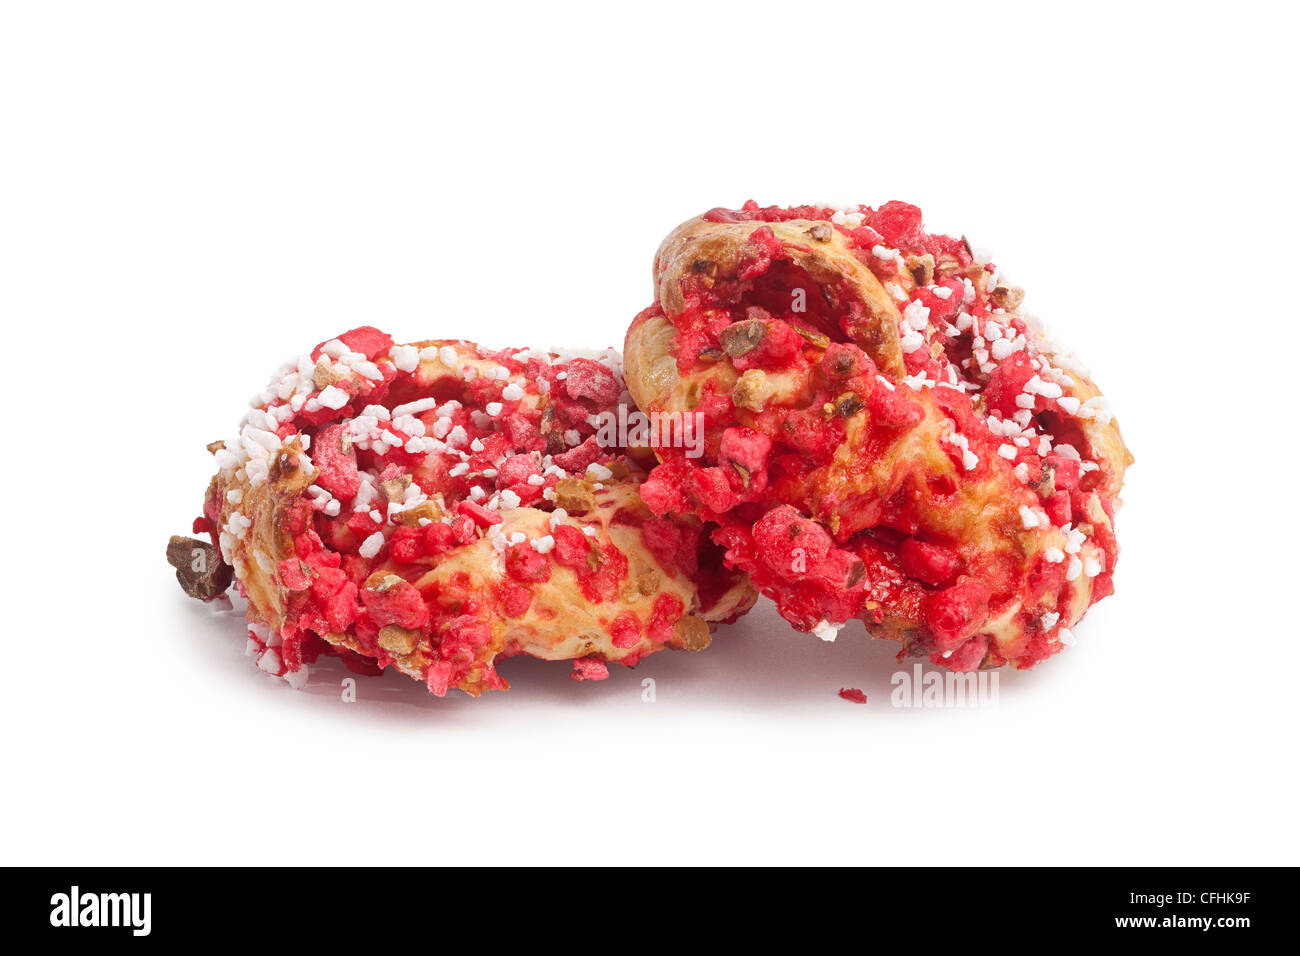 Brioches with sugared almonds (Saint-Genix cakes), photographed in the studio on a white background. Brioches aux pralines. Stock Photo